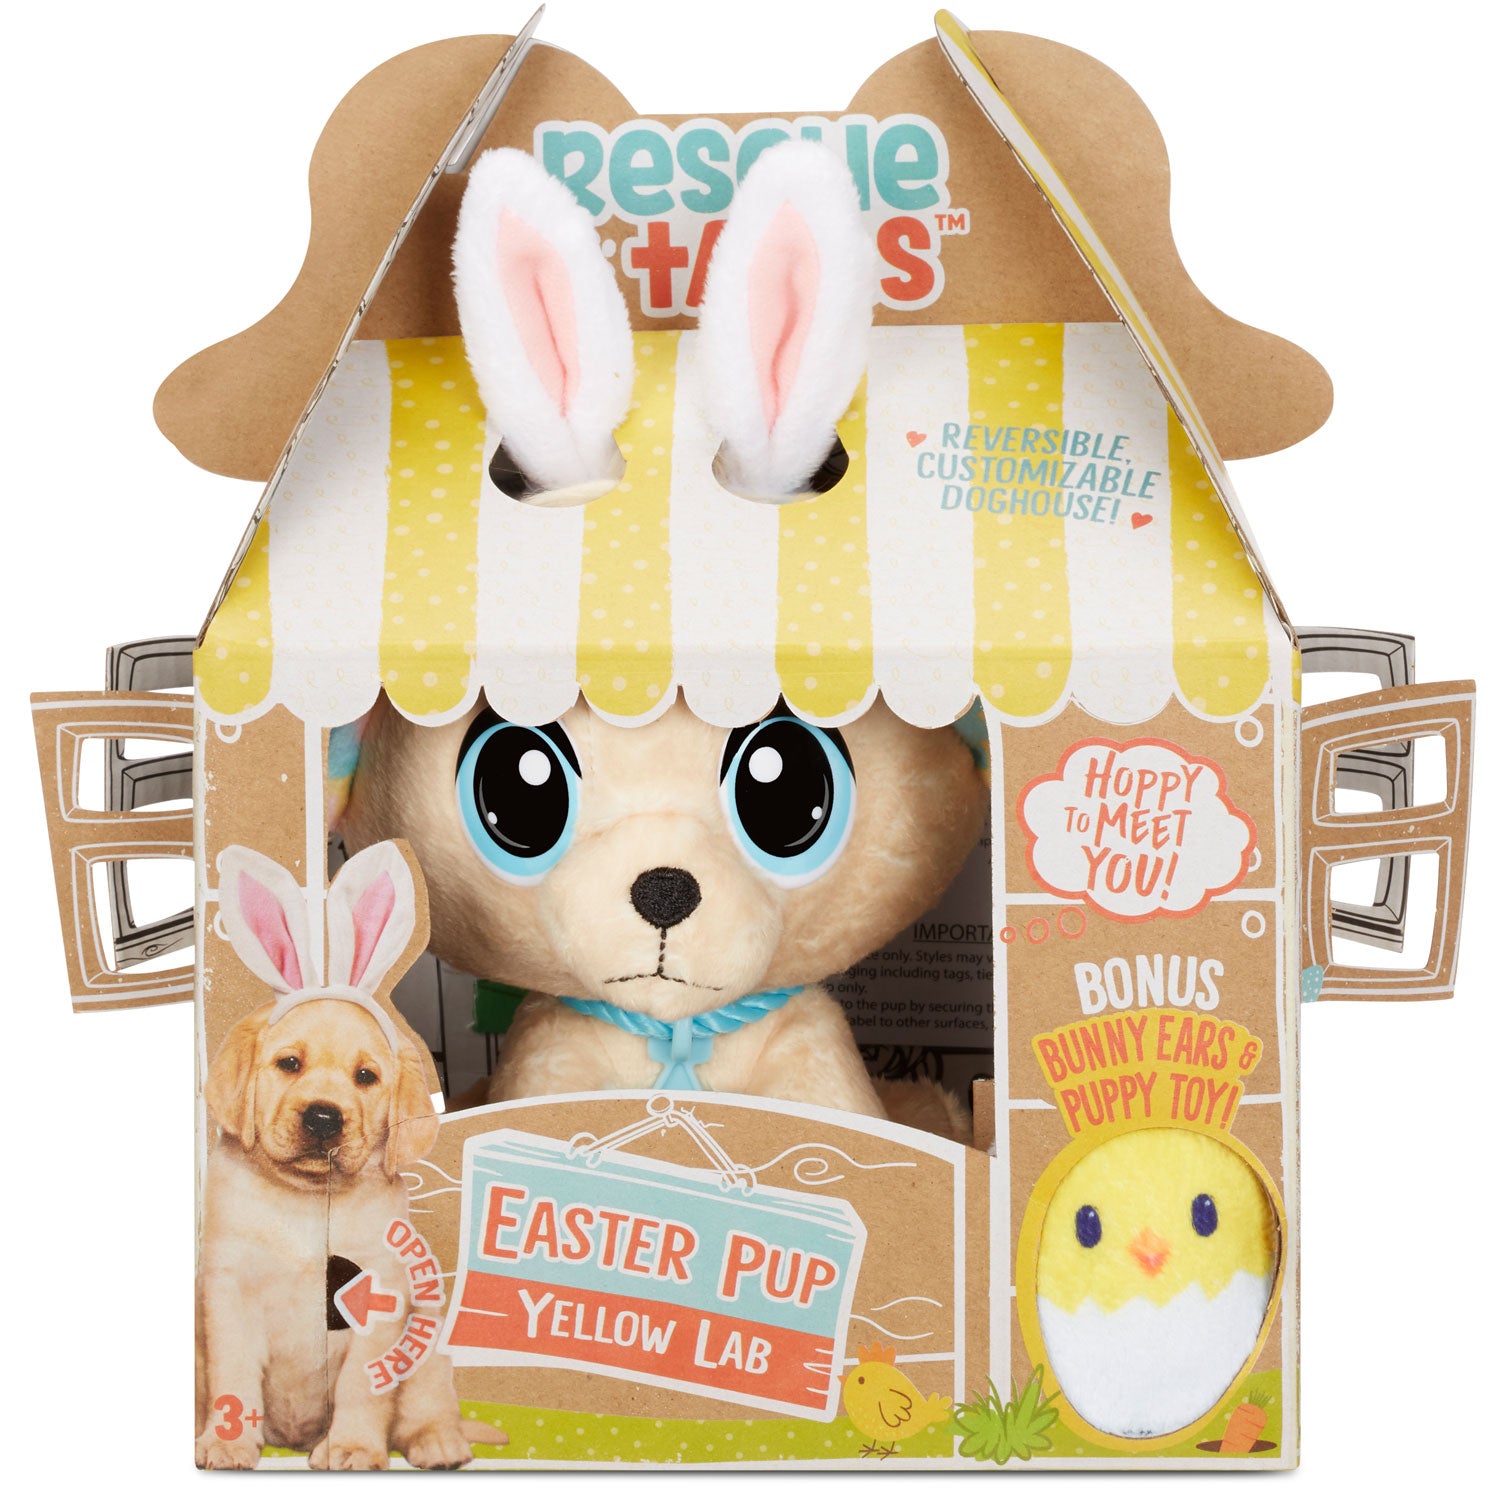 Adopt Me!™ Series 2 Surprise Plush Pets Blind Bag - Styles May Vary